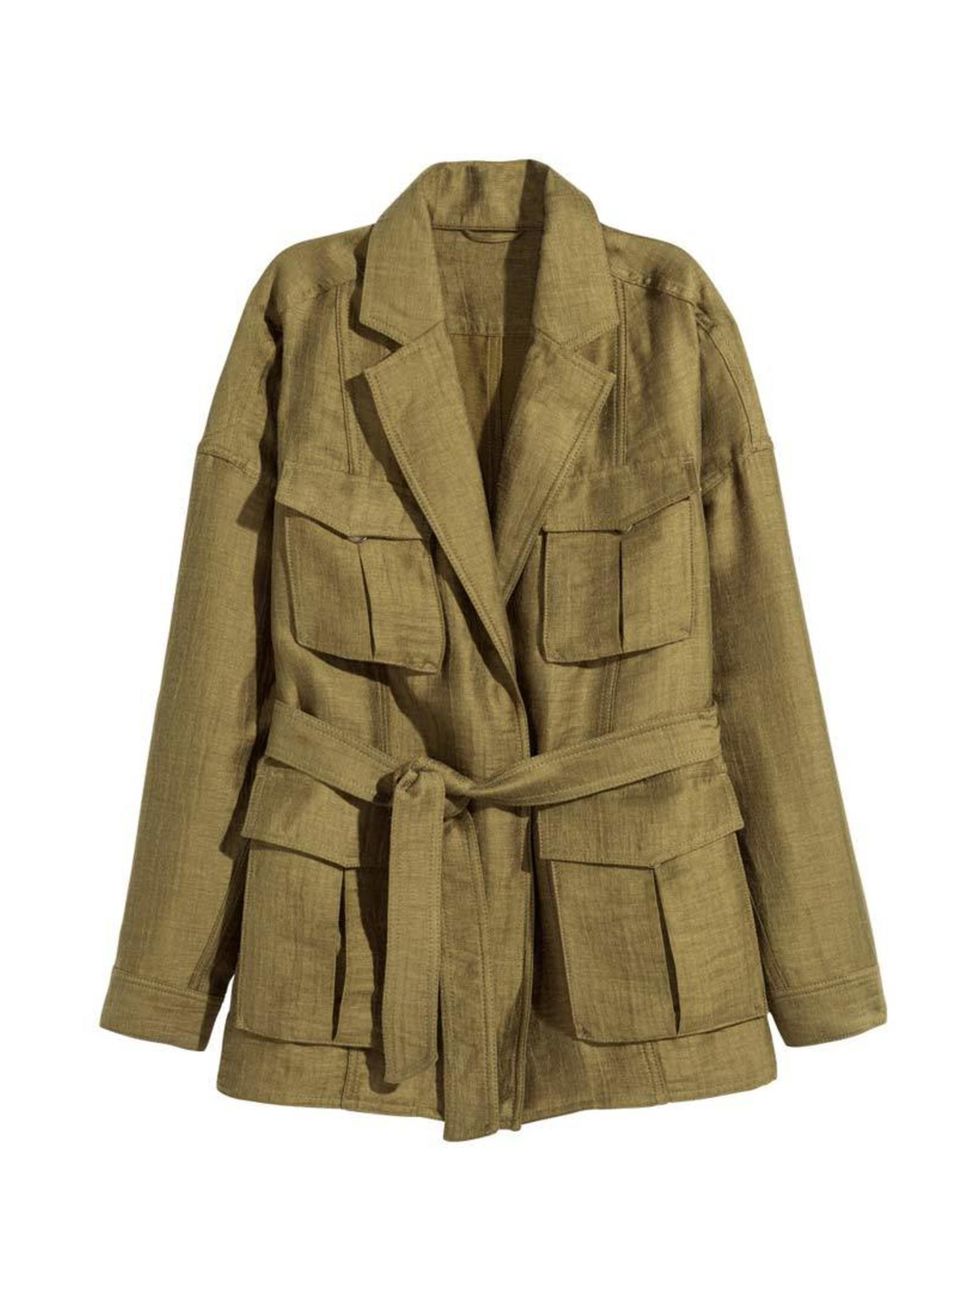 <p>This military-inspired jacket will toughen up a white summer dress.</p>

<p><a href="http://www.hm.com/gb/product/10853?article=10853-A" target="_blank">H&M</a> jacket, £49.99</p>